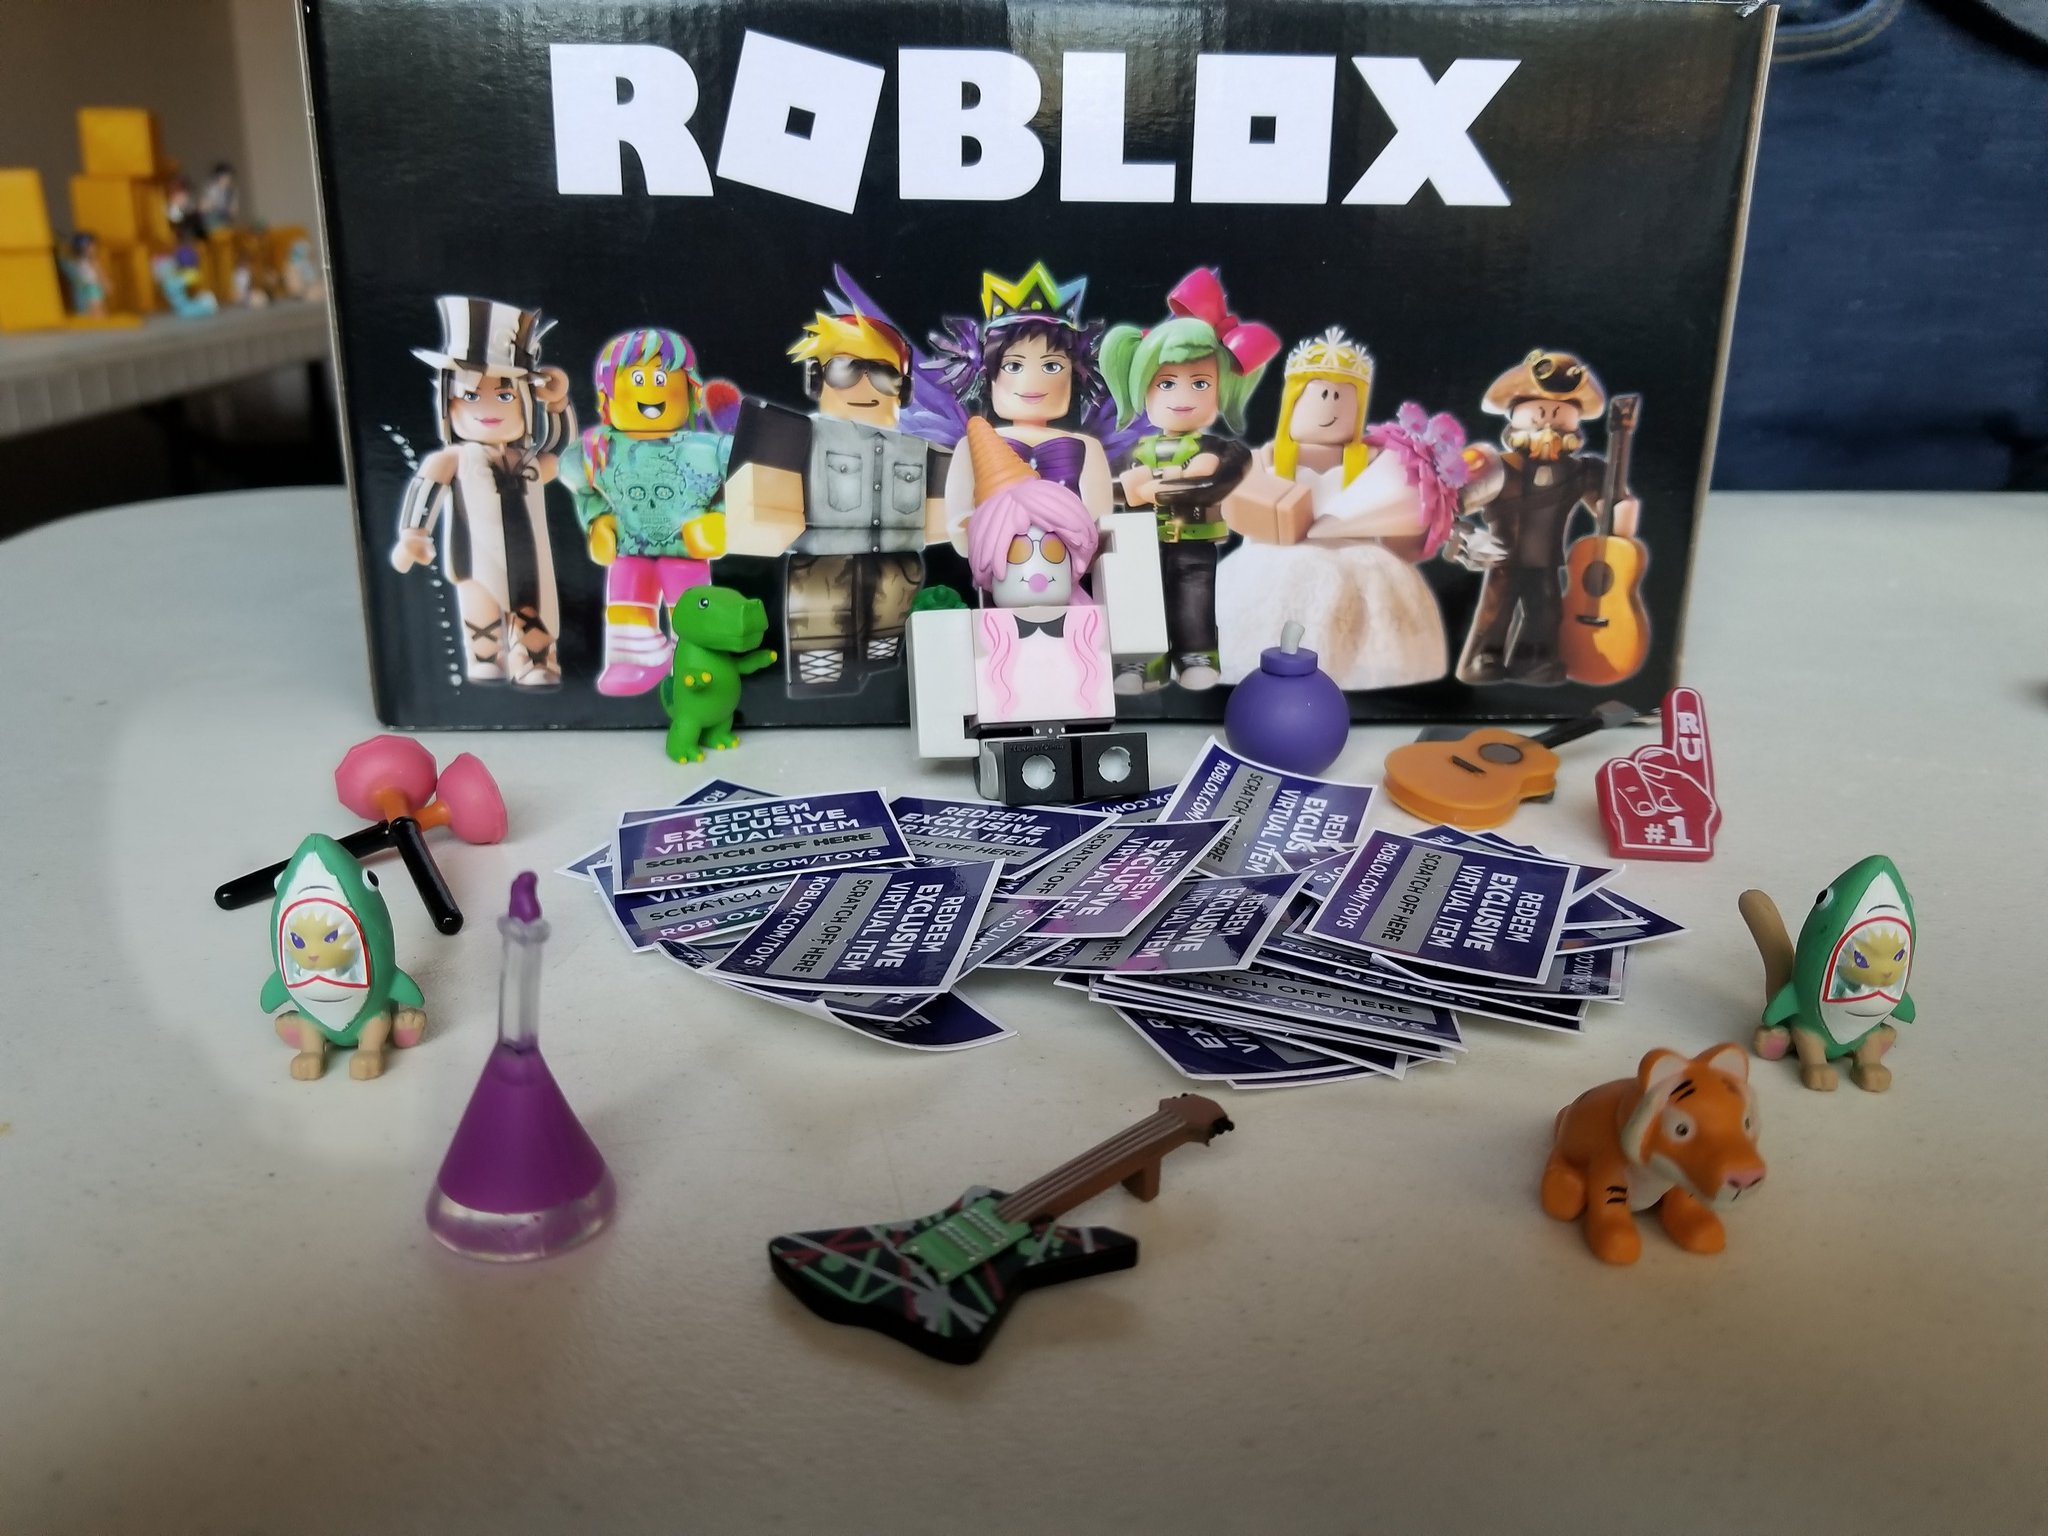 Anne Shoemaker On Twitter Roblox Toy Code Giveaway 30 Winners Rt And Follow To Enter Also Must Be Able To Be Dmed Ends December 25th Https T Co 4thquh0wcp - anne on twitter roblox toy code giveaway 30 winners